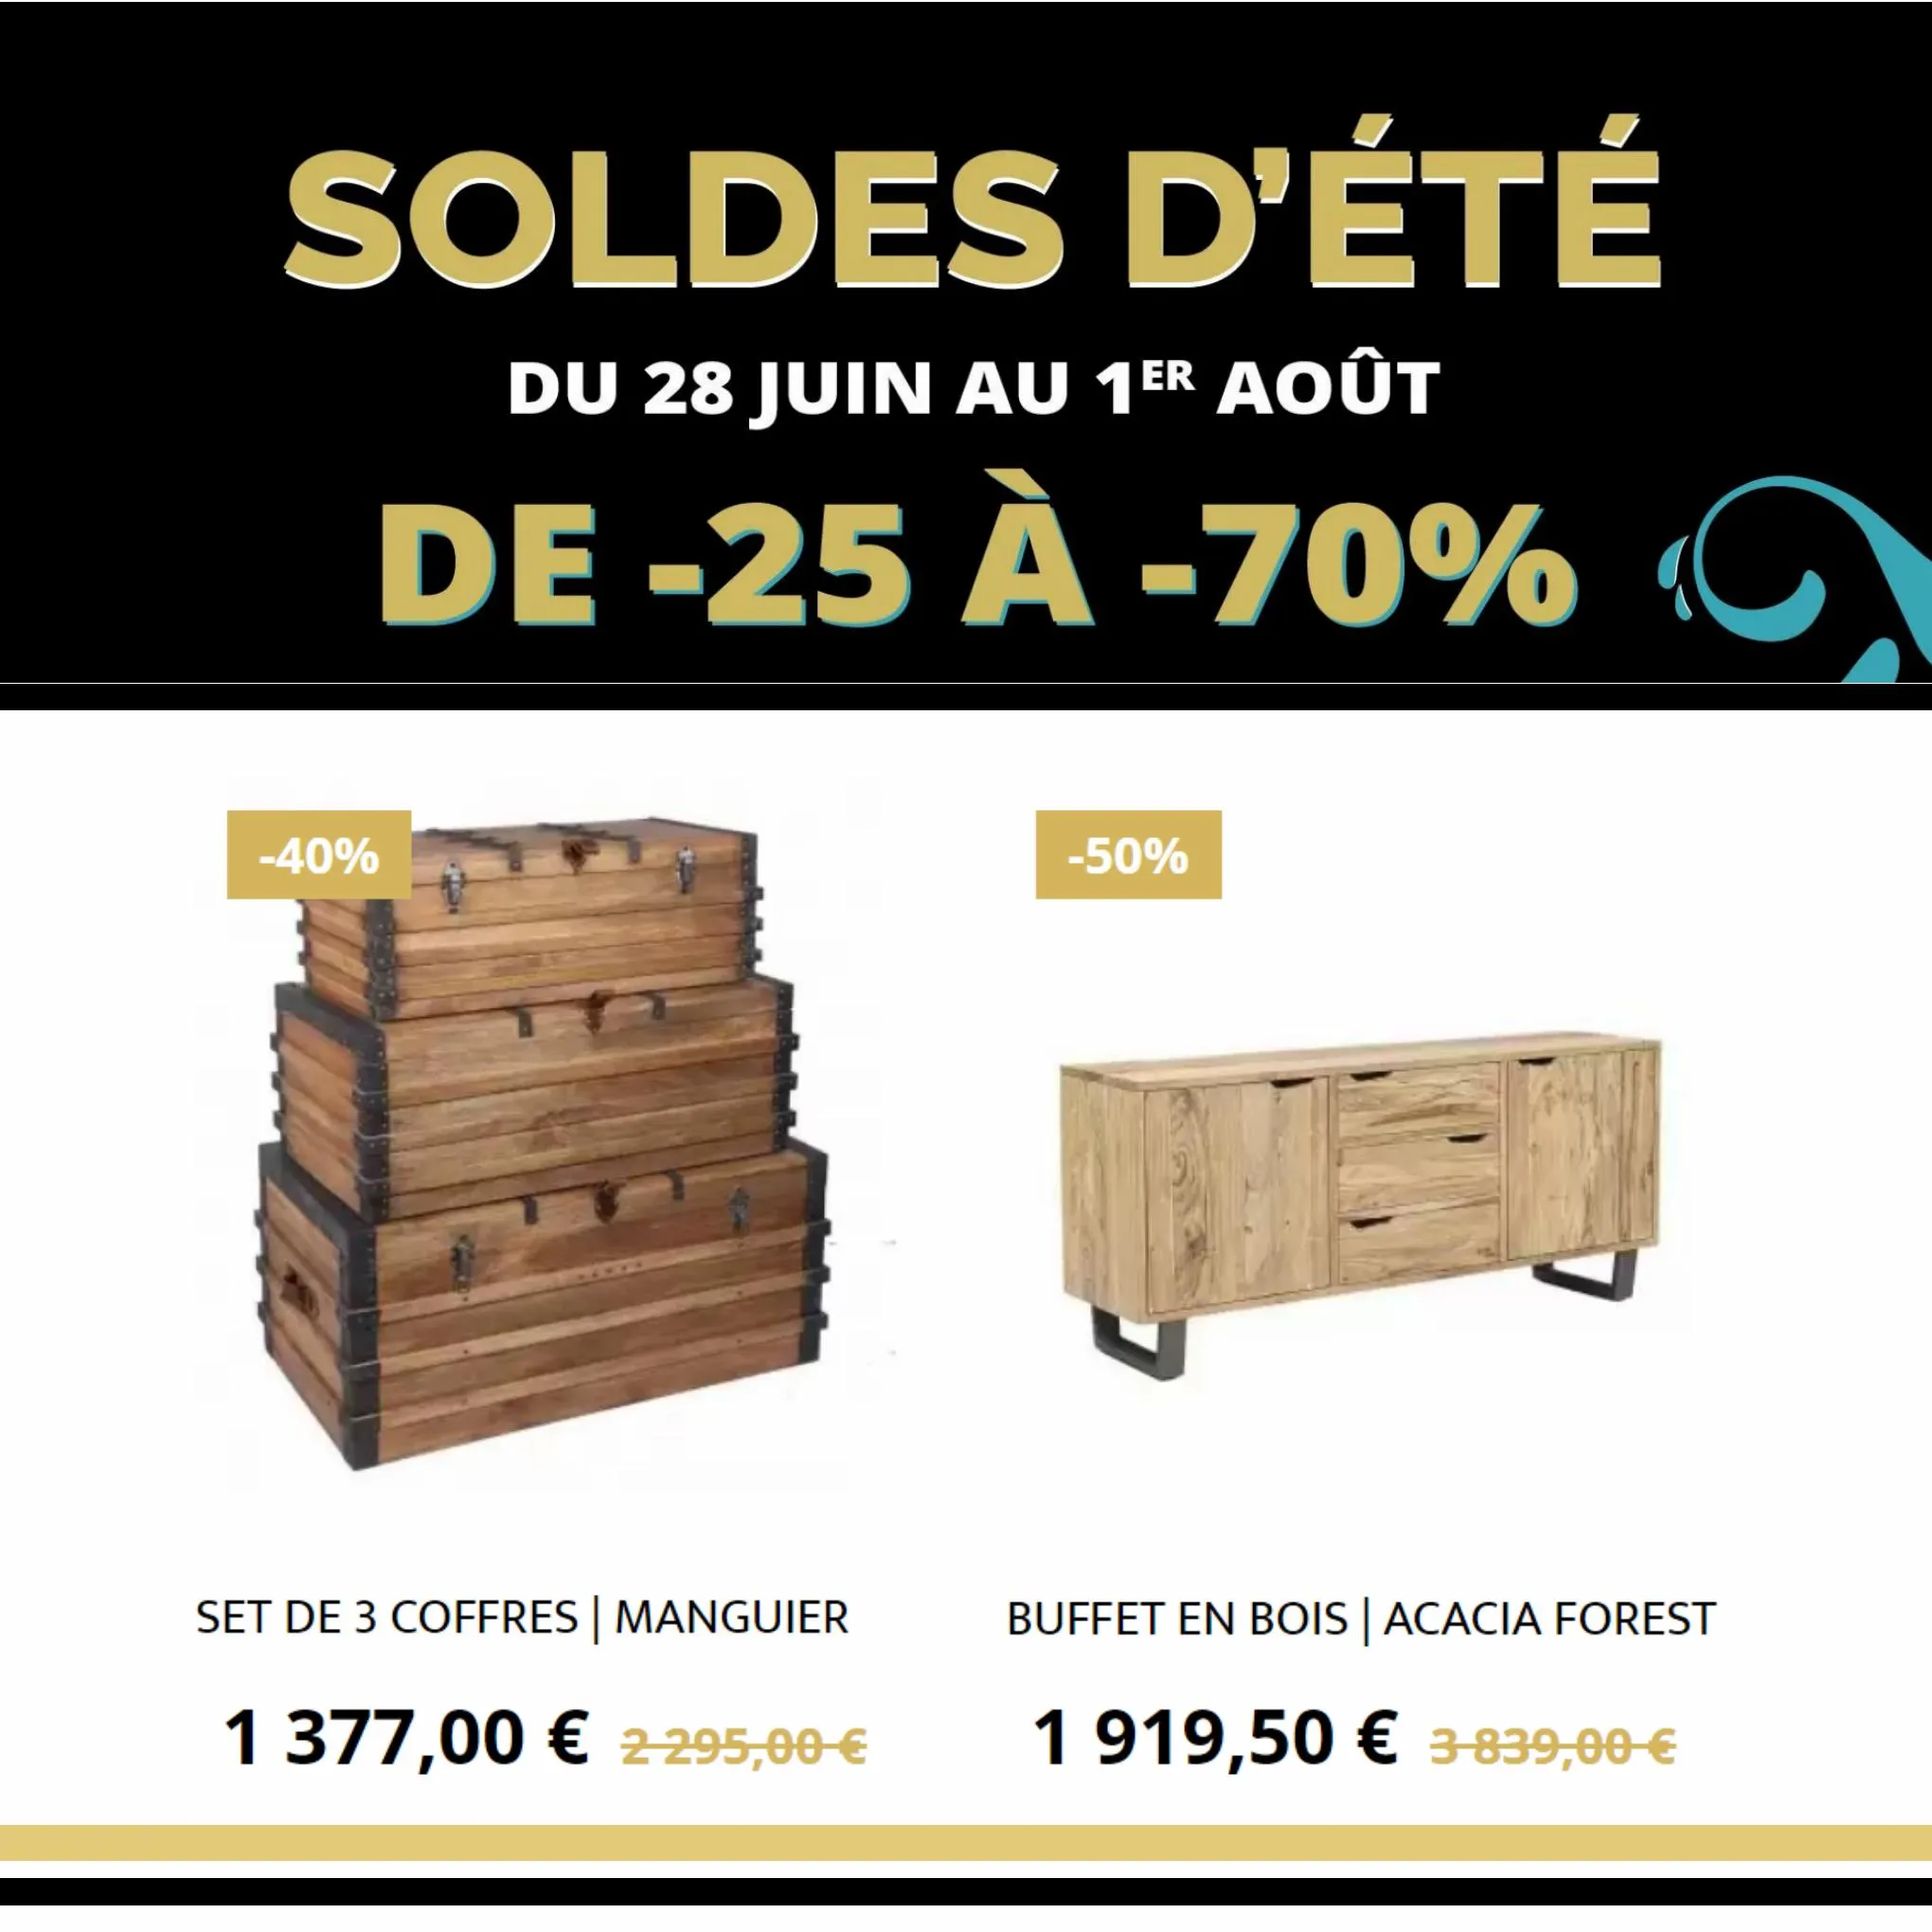 Catalogue Bois & Chiffons Soldes, page 00004